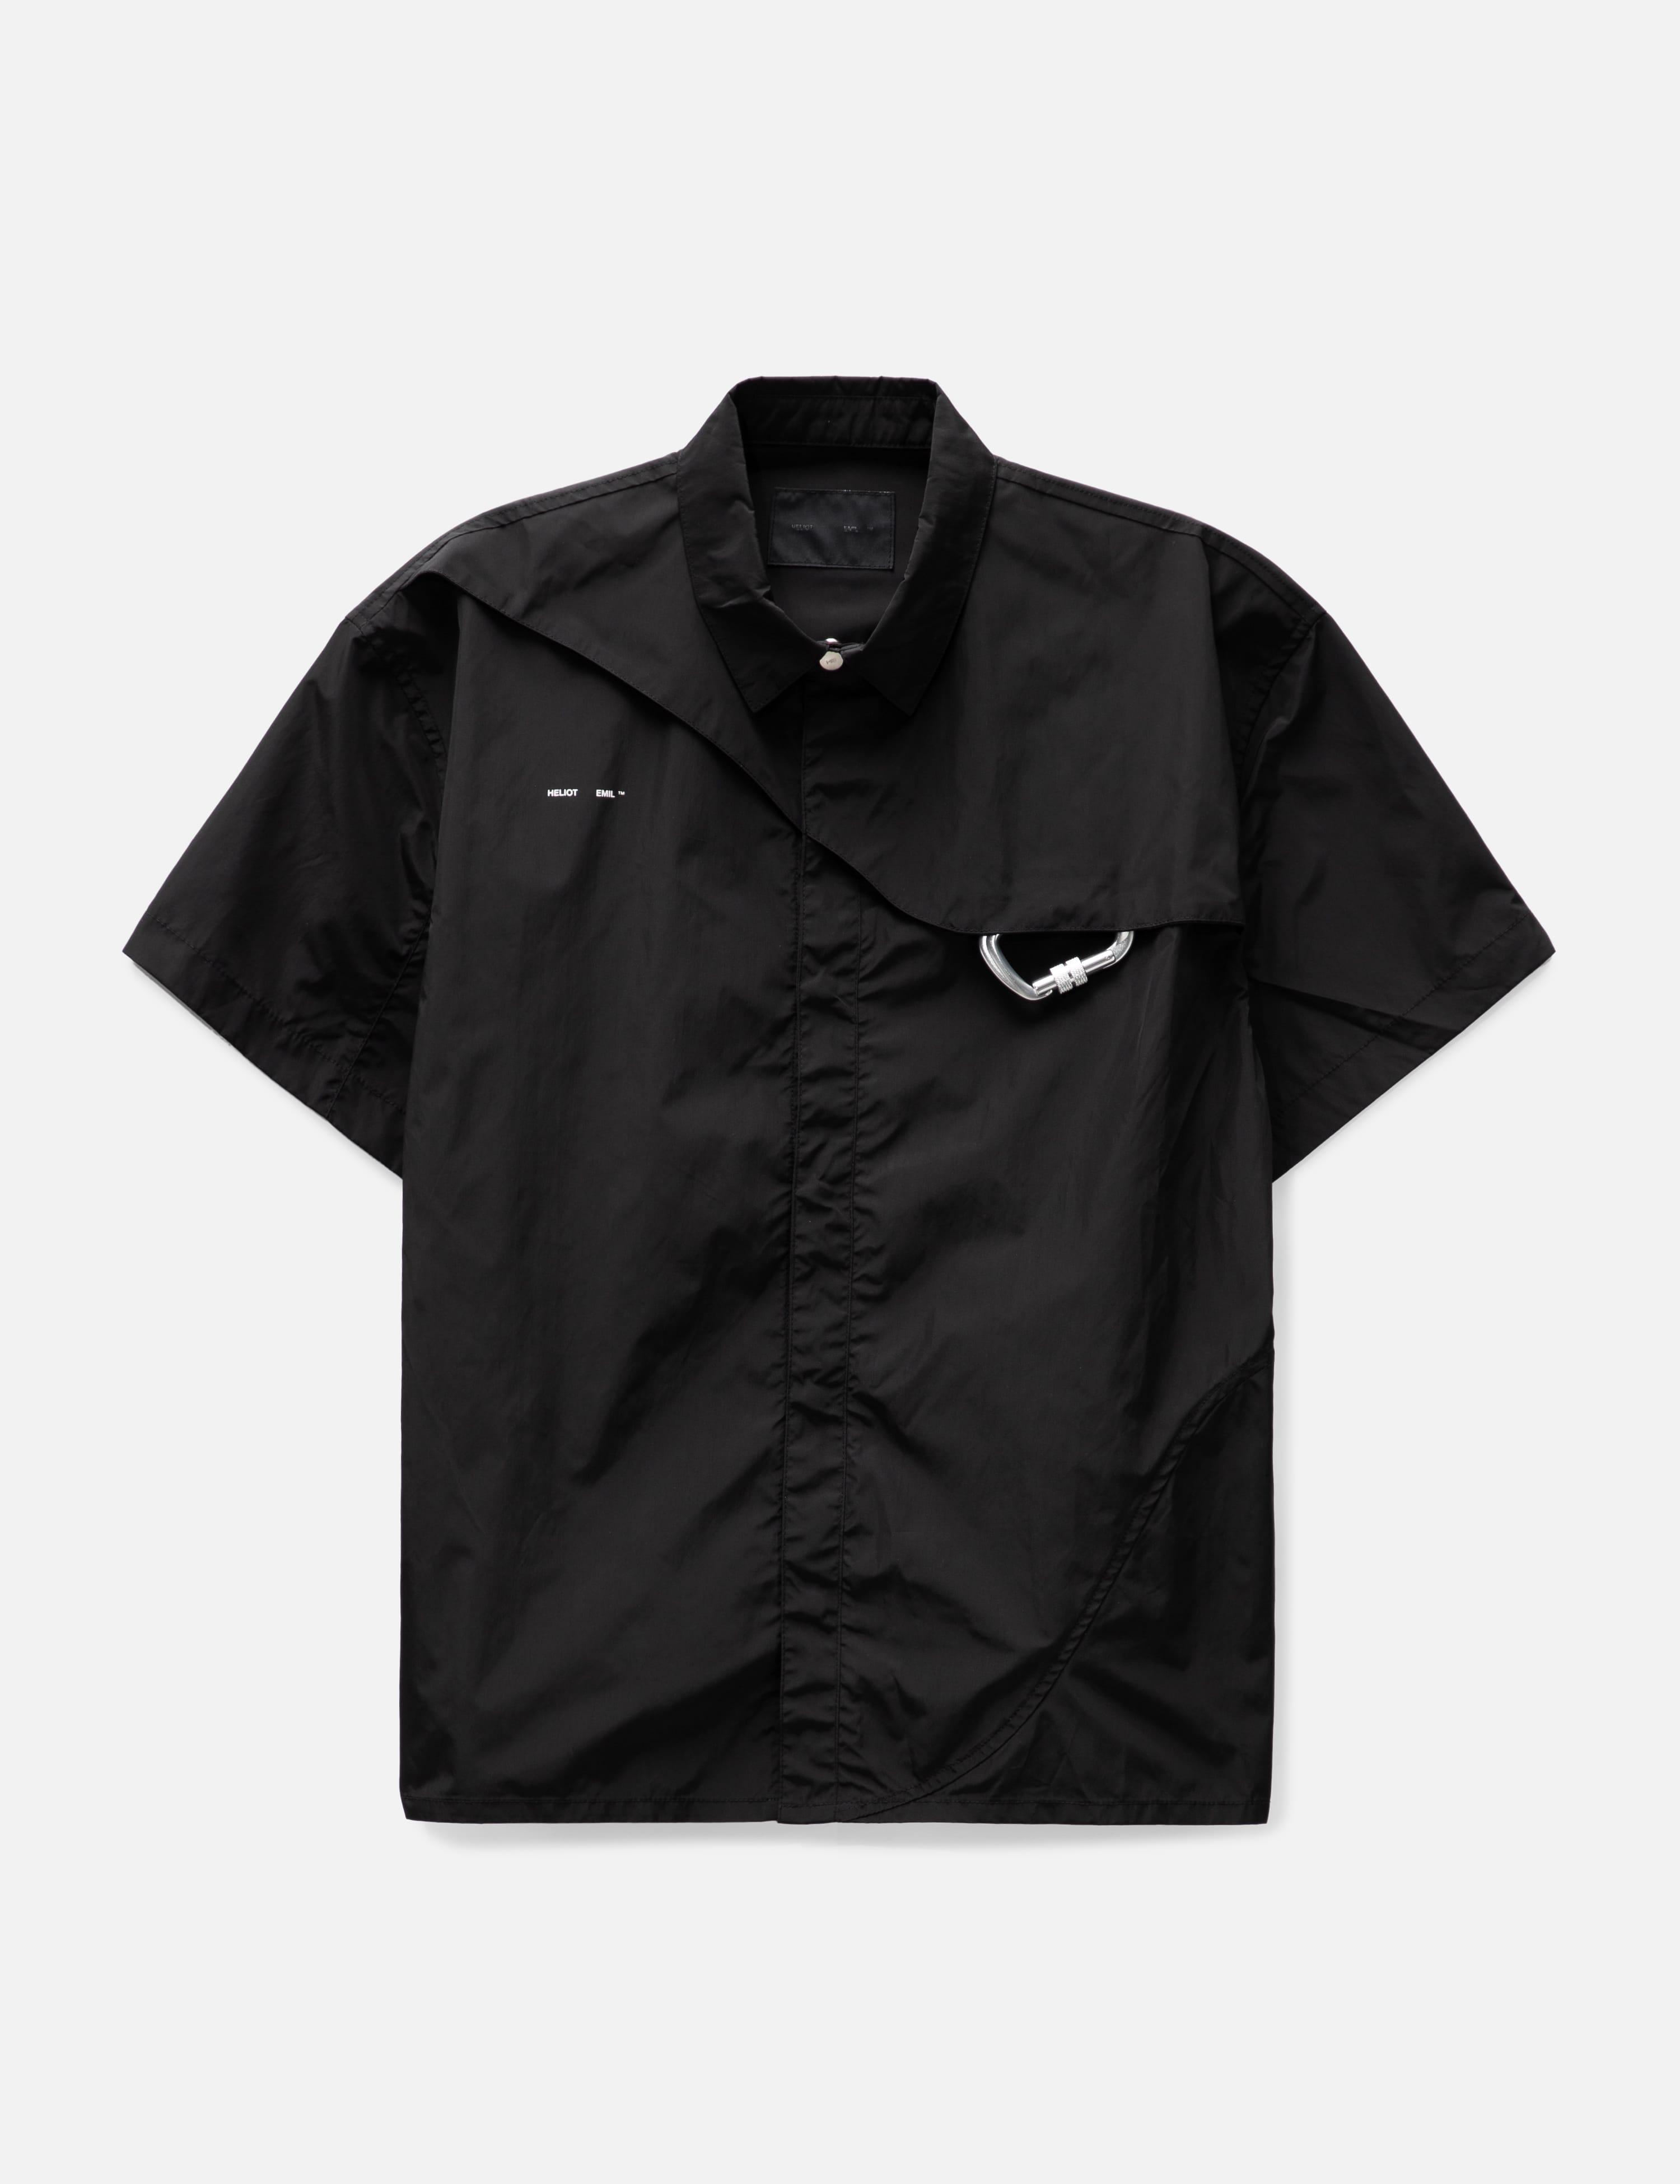 Seven by seven - REWORK ASYMMETRY SHIRTS | HBX - Globally Curated 